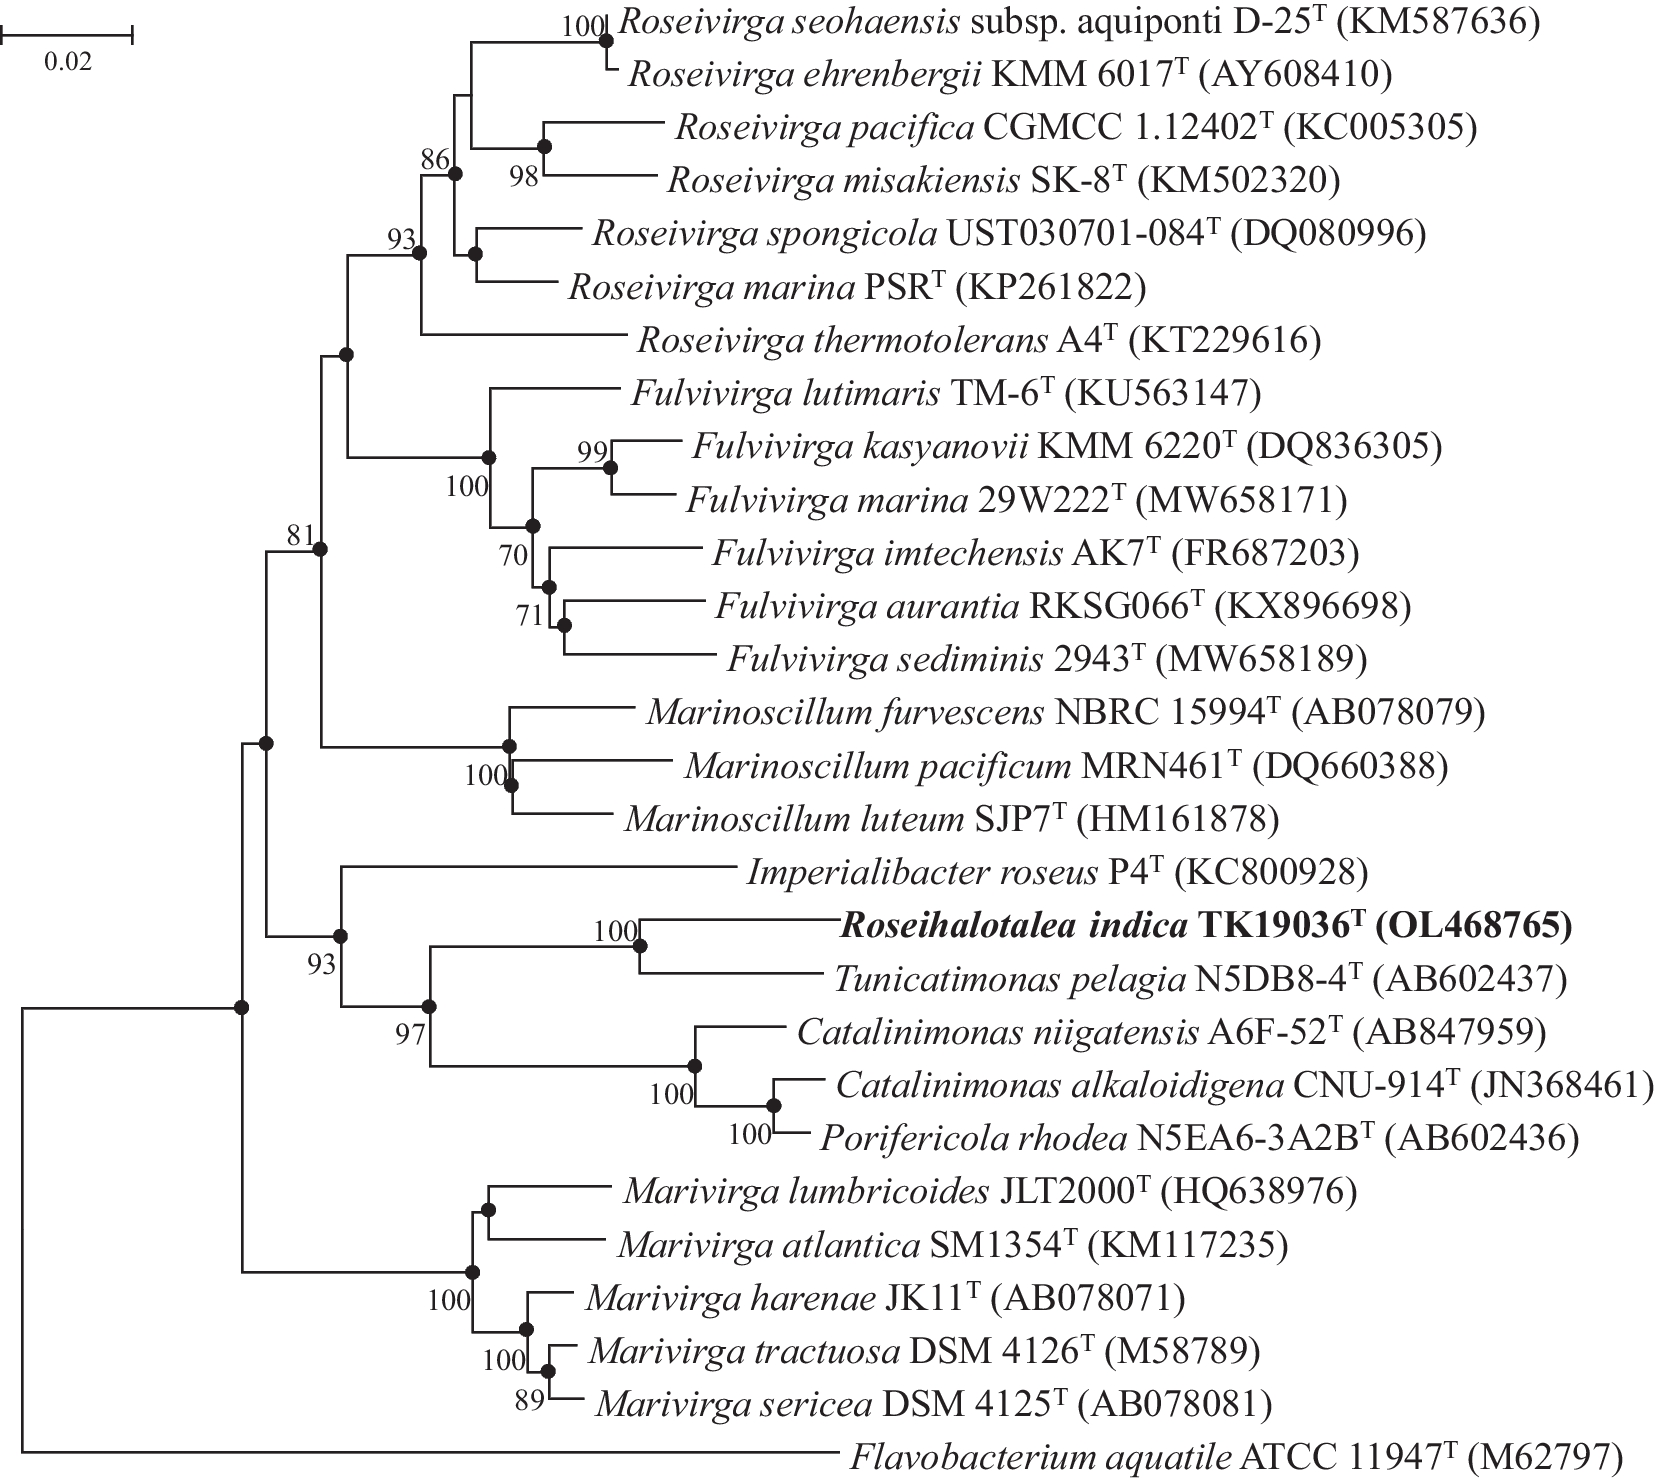 Roseihalotalea indica gen. nov., sp. nov., a halophilic Bacteroidetes from mesopelagic Southwest Indian Ocean with higher carbohydrate metabolic potential